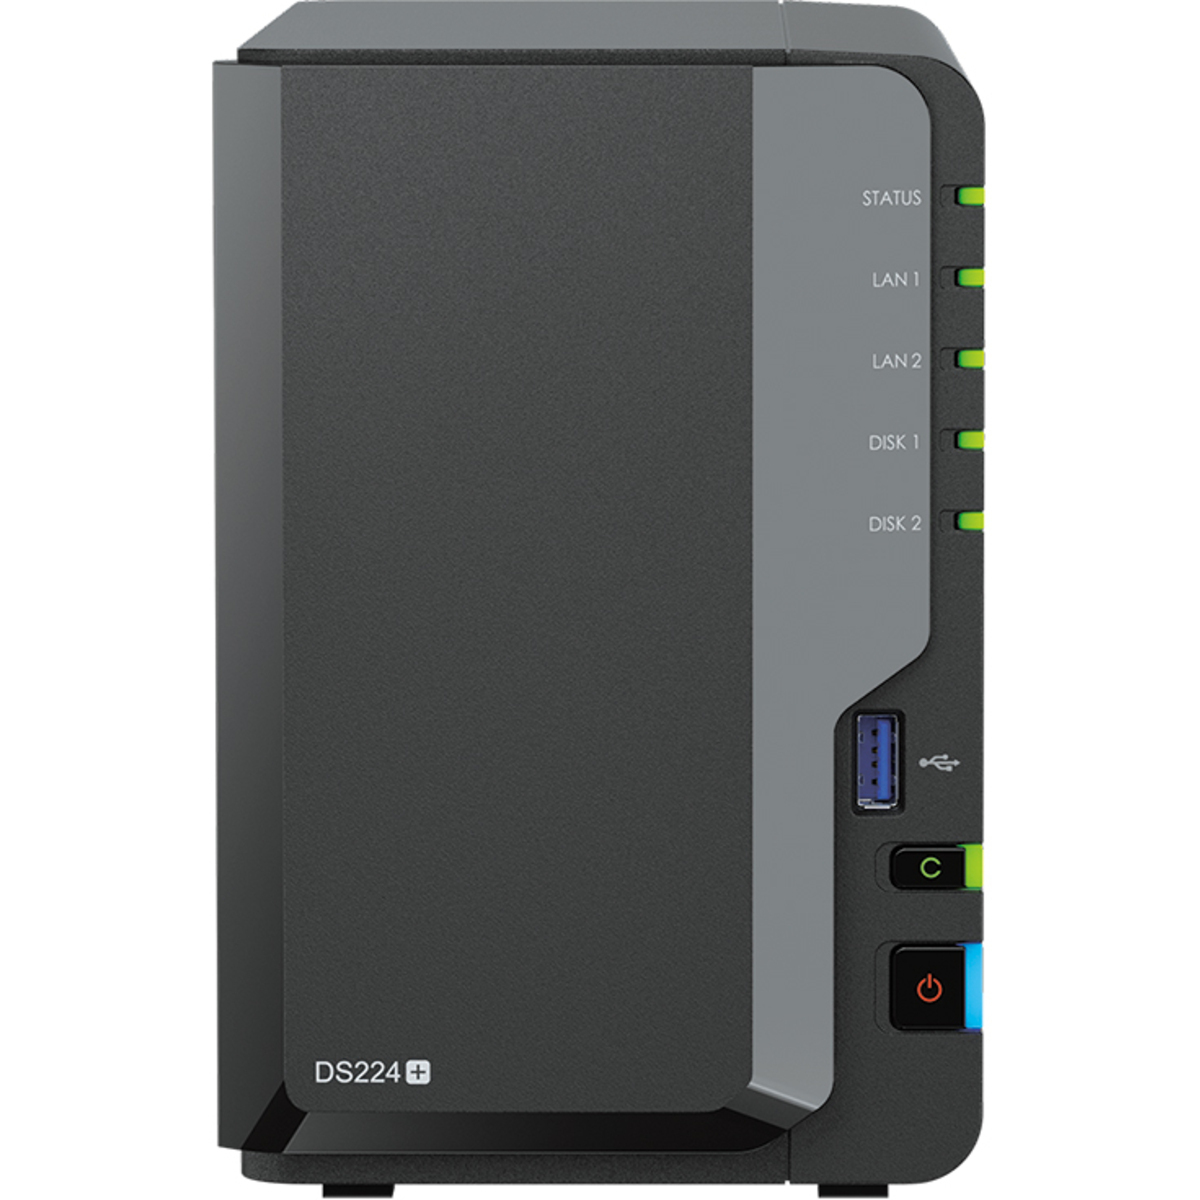 Synology DiskStation DS224+ 16tb 2-Bay Desktop Personal / Basic Home / Small Office NAS - Network Attached Storage Device 2x8tb Western Digital Red Plus WD80EFPX 3.5 7200rpm SATA 6Gb/s HDD NAS Class Drives Installed - Burn-In Tested - ON SALE - FREE RAM UPGRADE DiskStation DS224+